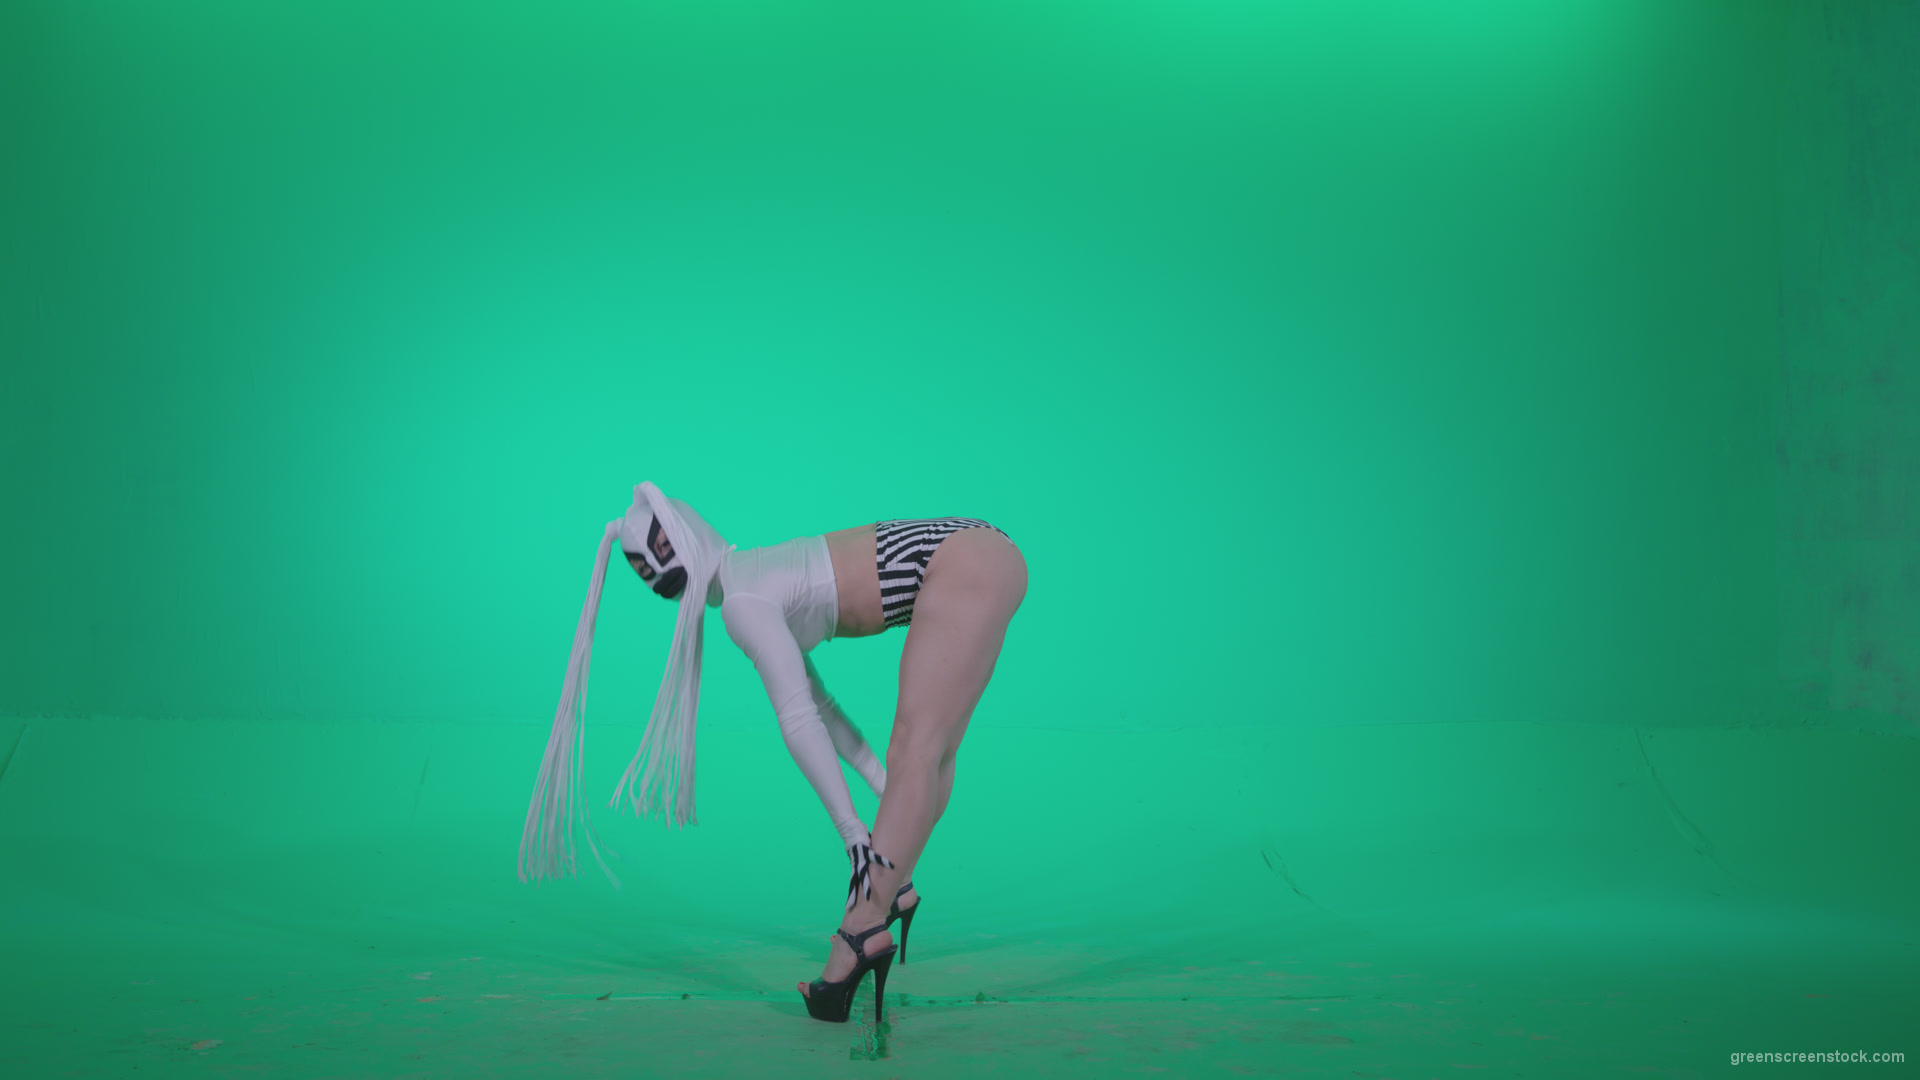 Go-go-Dancer-with-Latex-Top-t2-Green-Screen-Video-Footage_005 Green Screen Stock